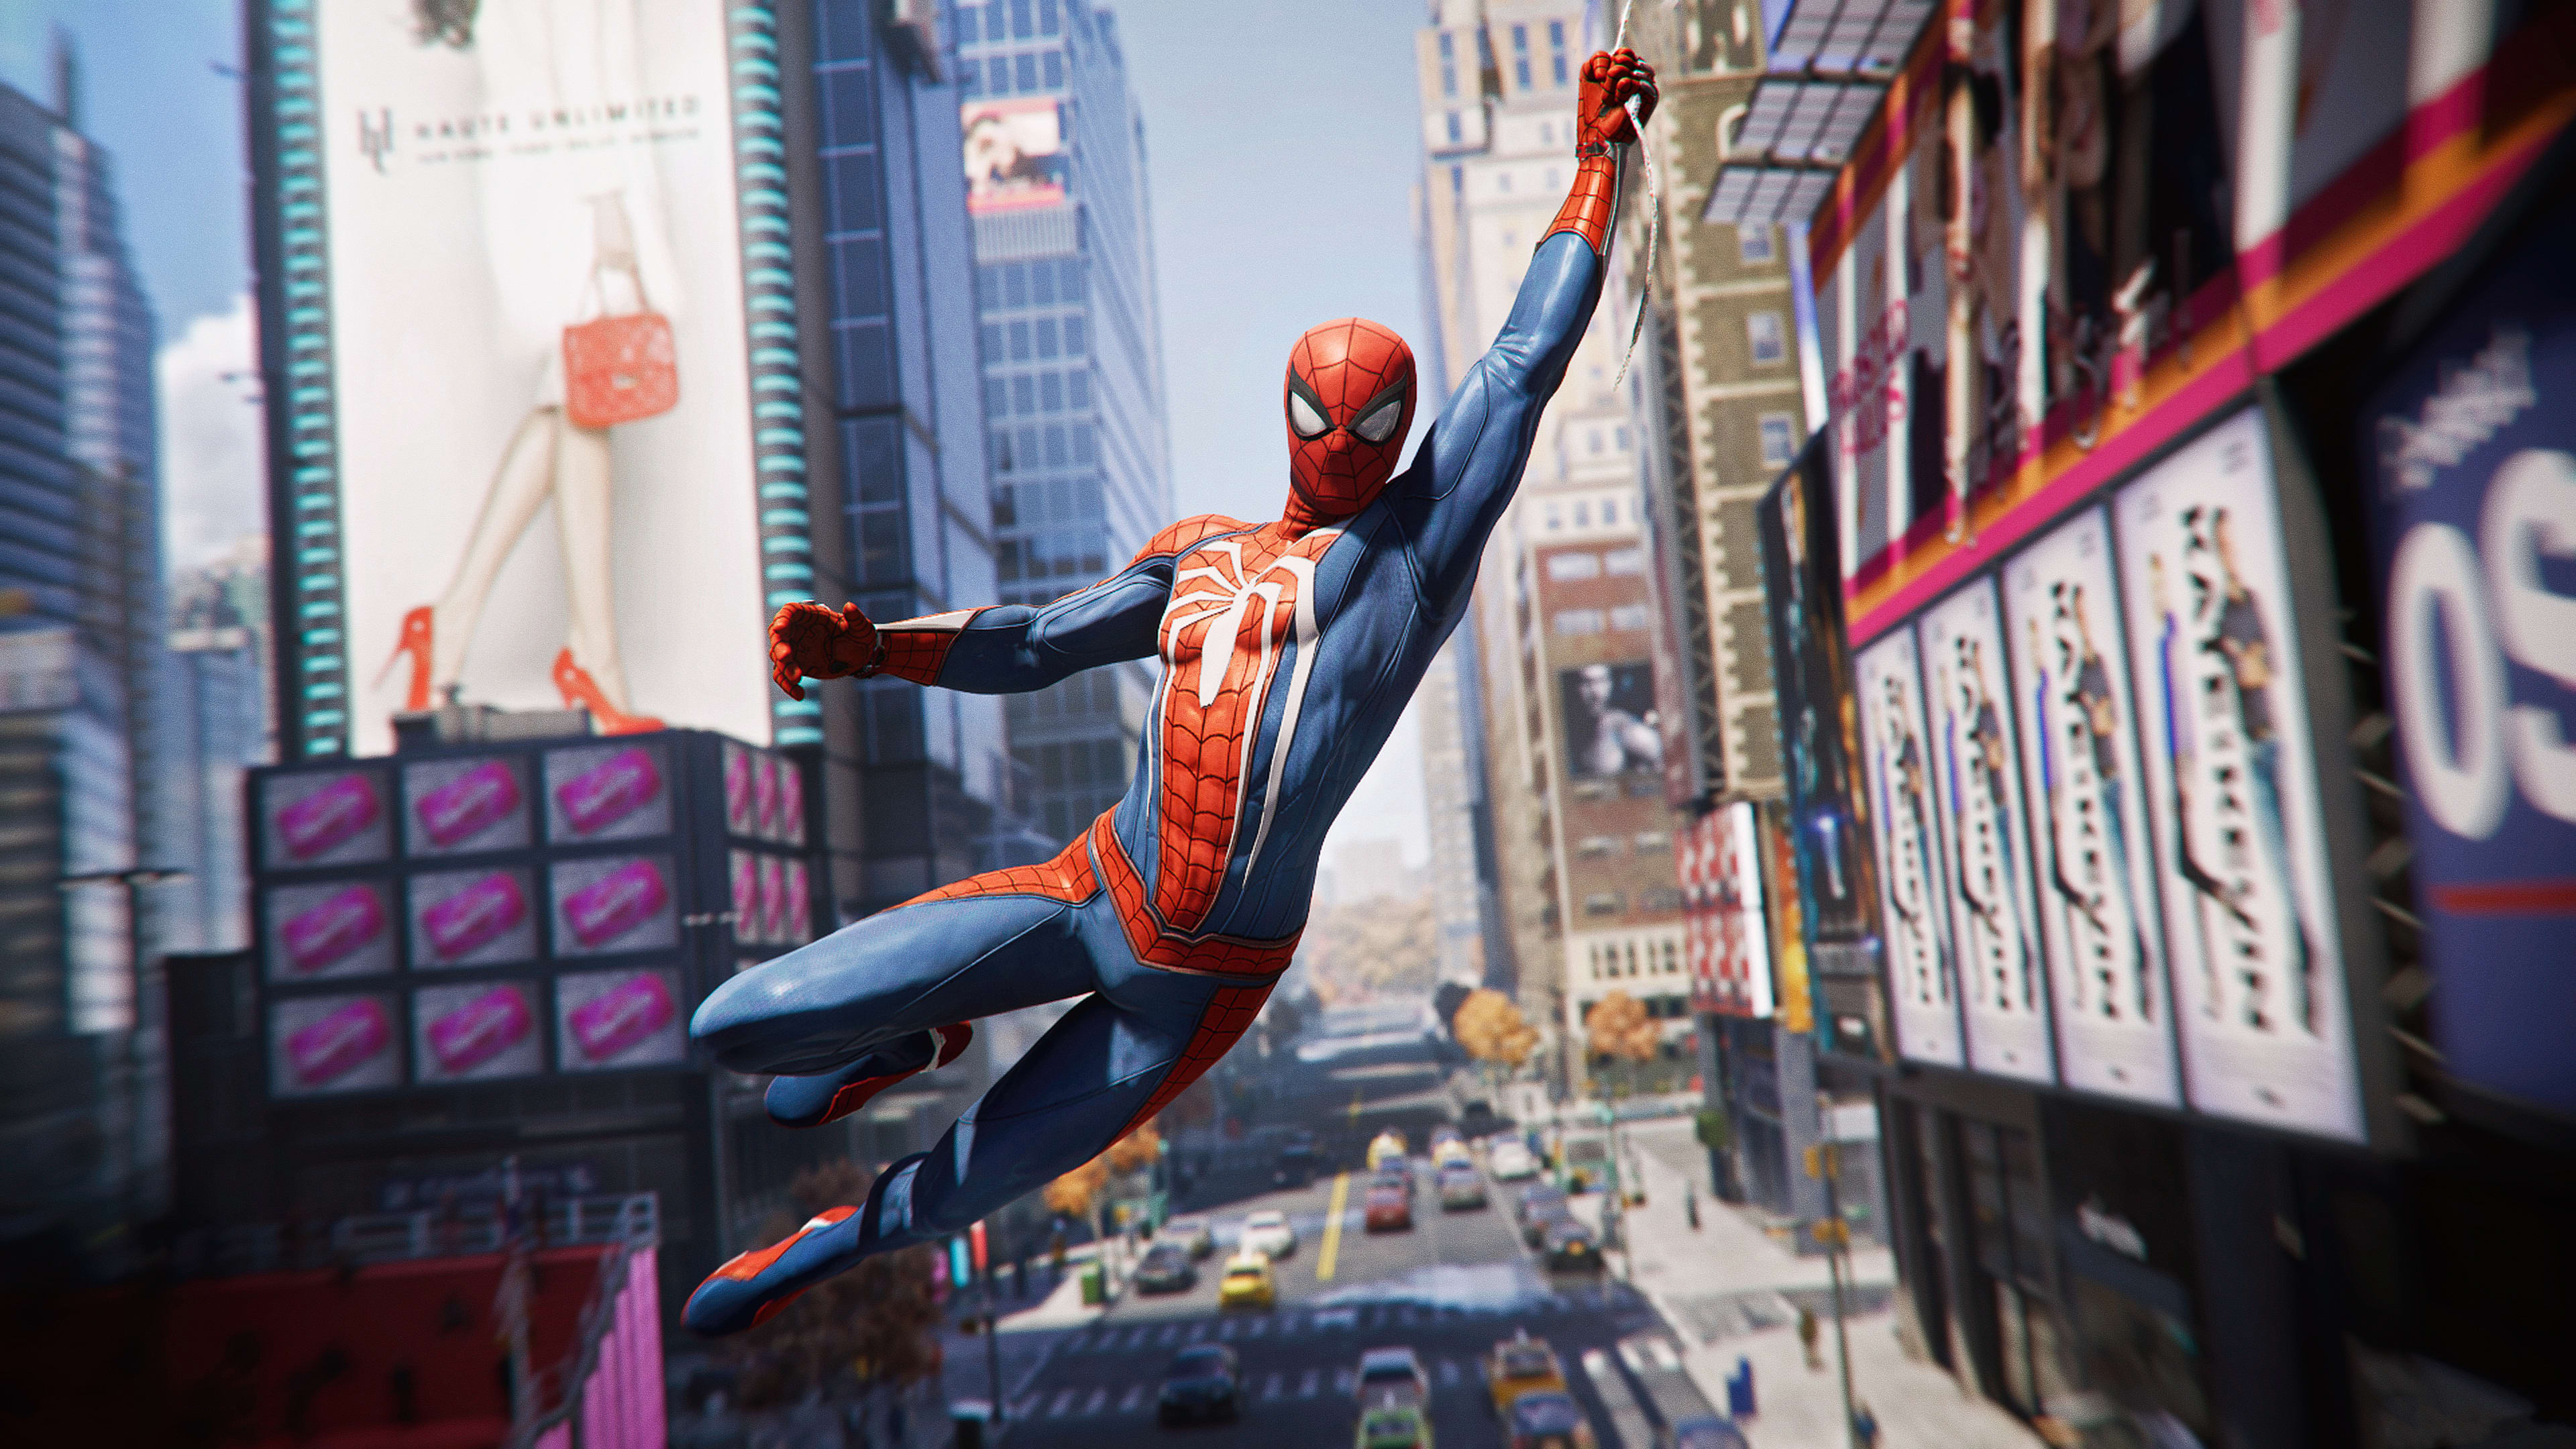 Download wallpaper: Spider Man from the video game 3840x2160